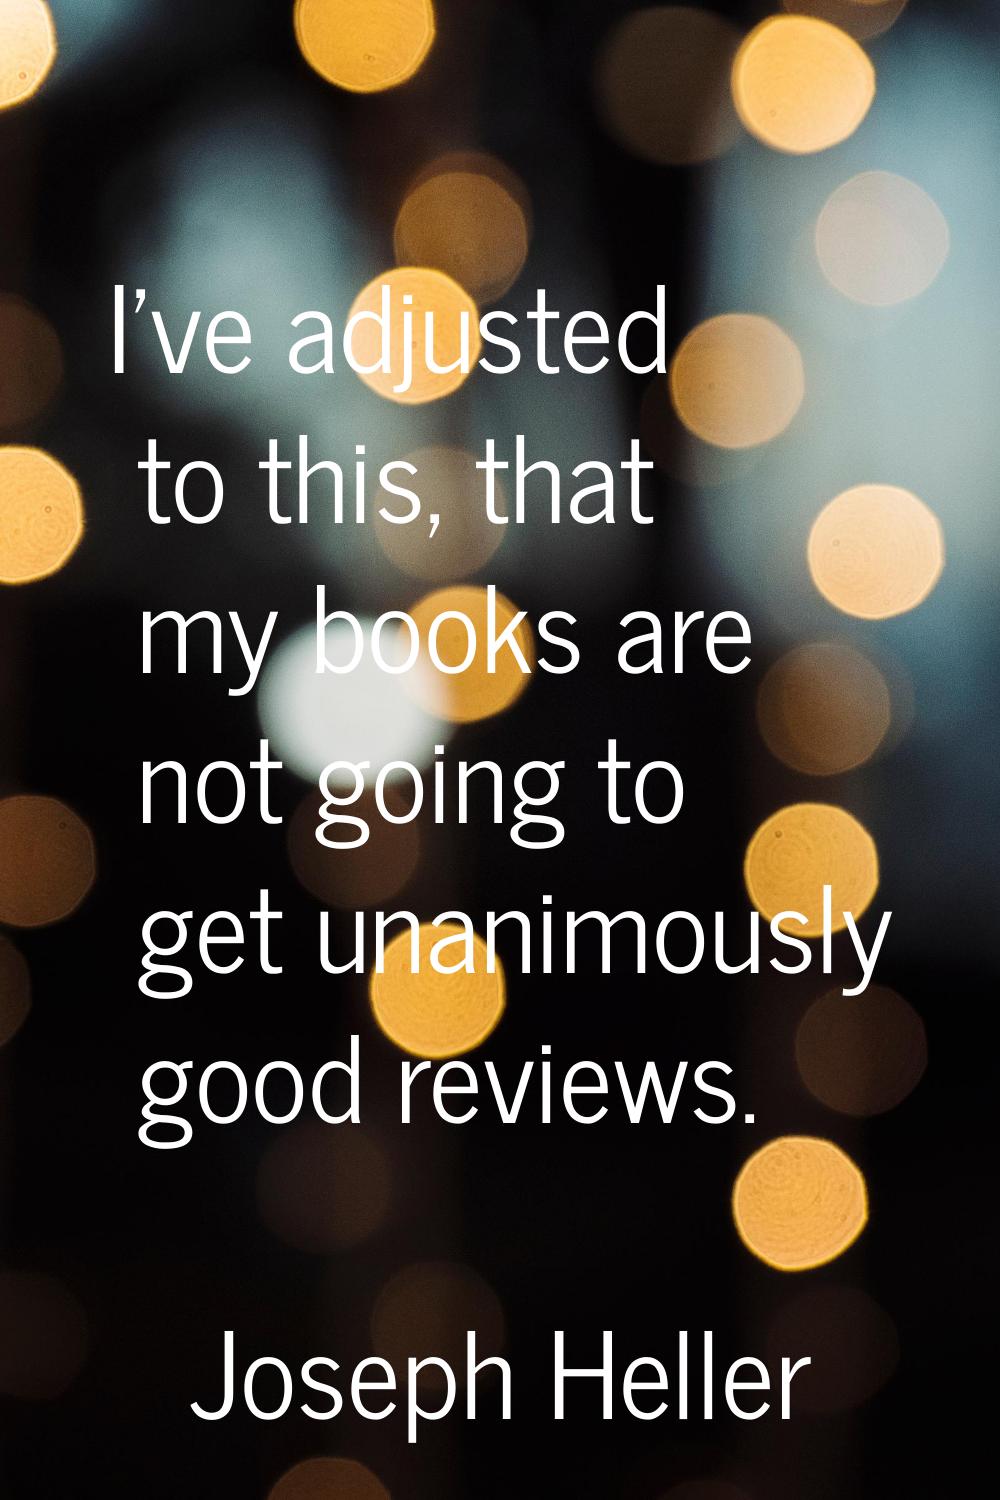 I've adjusted to this, that my books are not going to get unanimously good reviews.